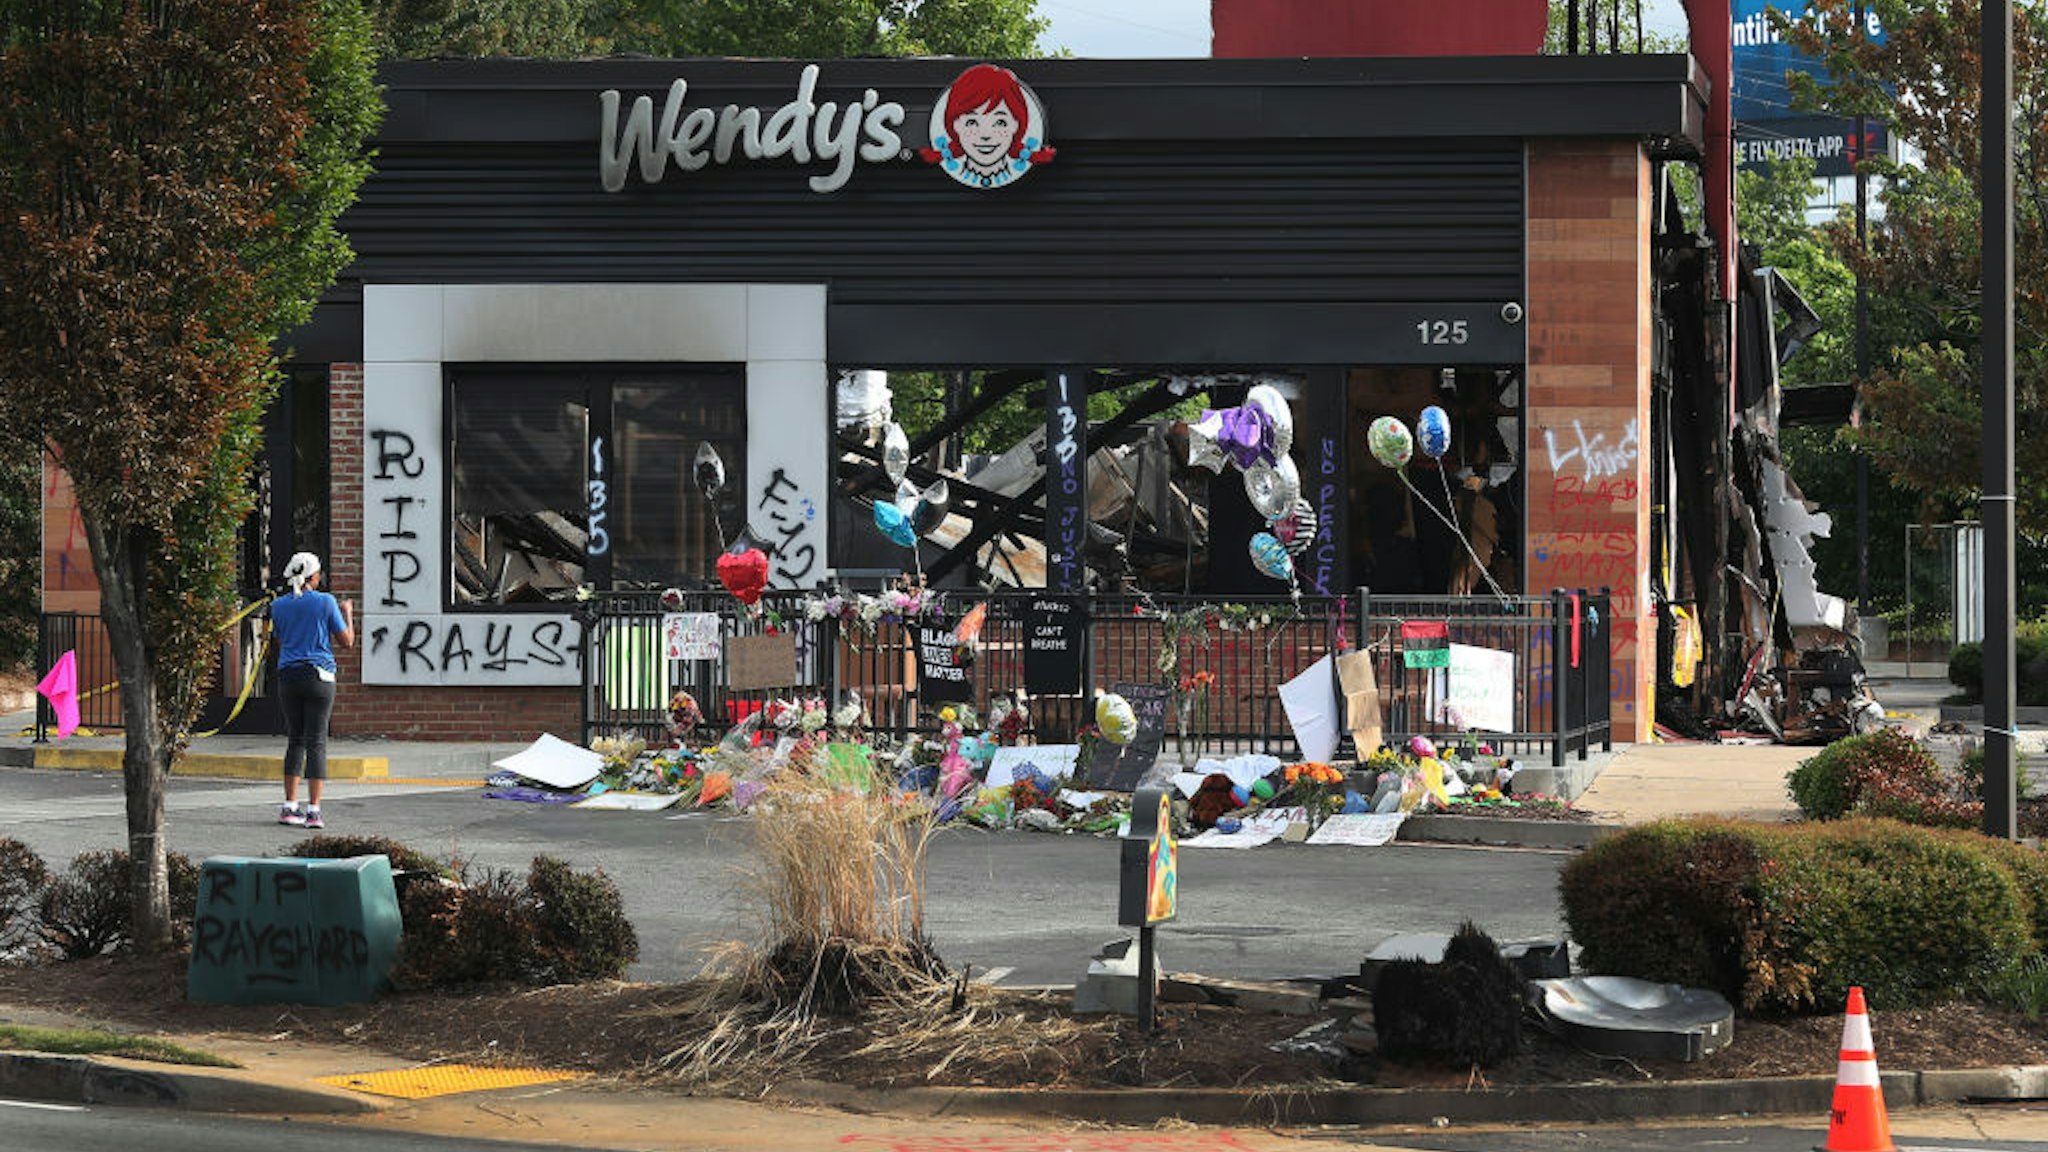 ATLANTA, GEORGIA - JUNE 17: People visit the memorial setup outside the Wendy's restaurant that was set on fire by demonstrators after Rayshard Brooks was killed on June 17, 2020 in Atlanta, Georgia. The site has become a place of remembrance for Mr. Brooks, who was killed by police while fleeing after a struggle during a field sobriety test in the Wendy's parking lot. (Photo by Joe Raedle/Getty Images)